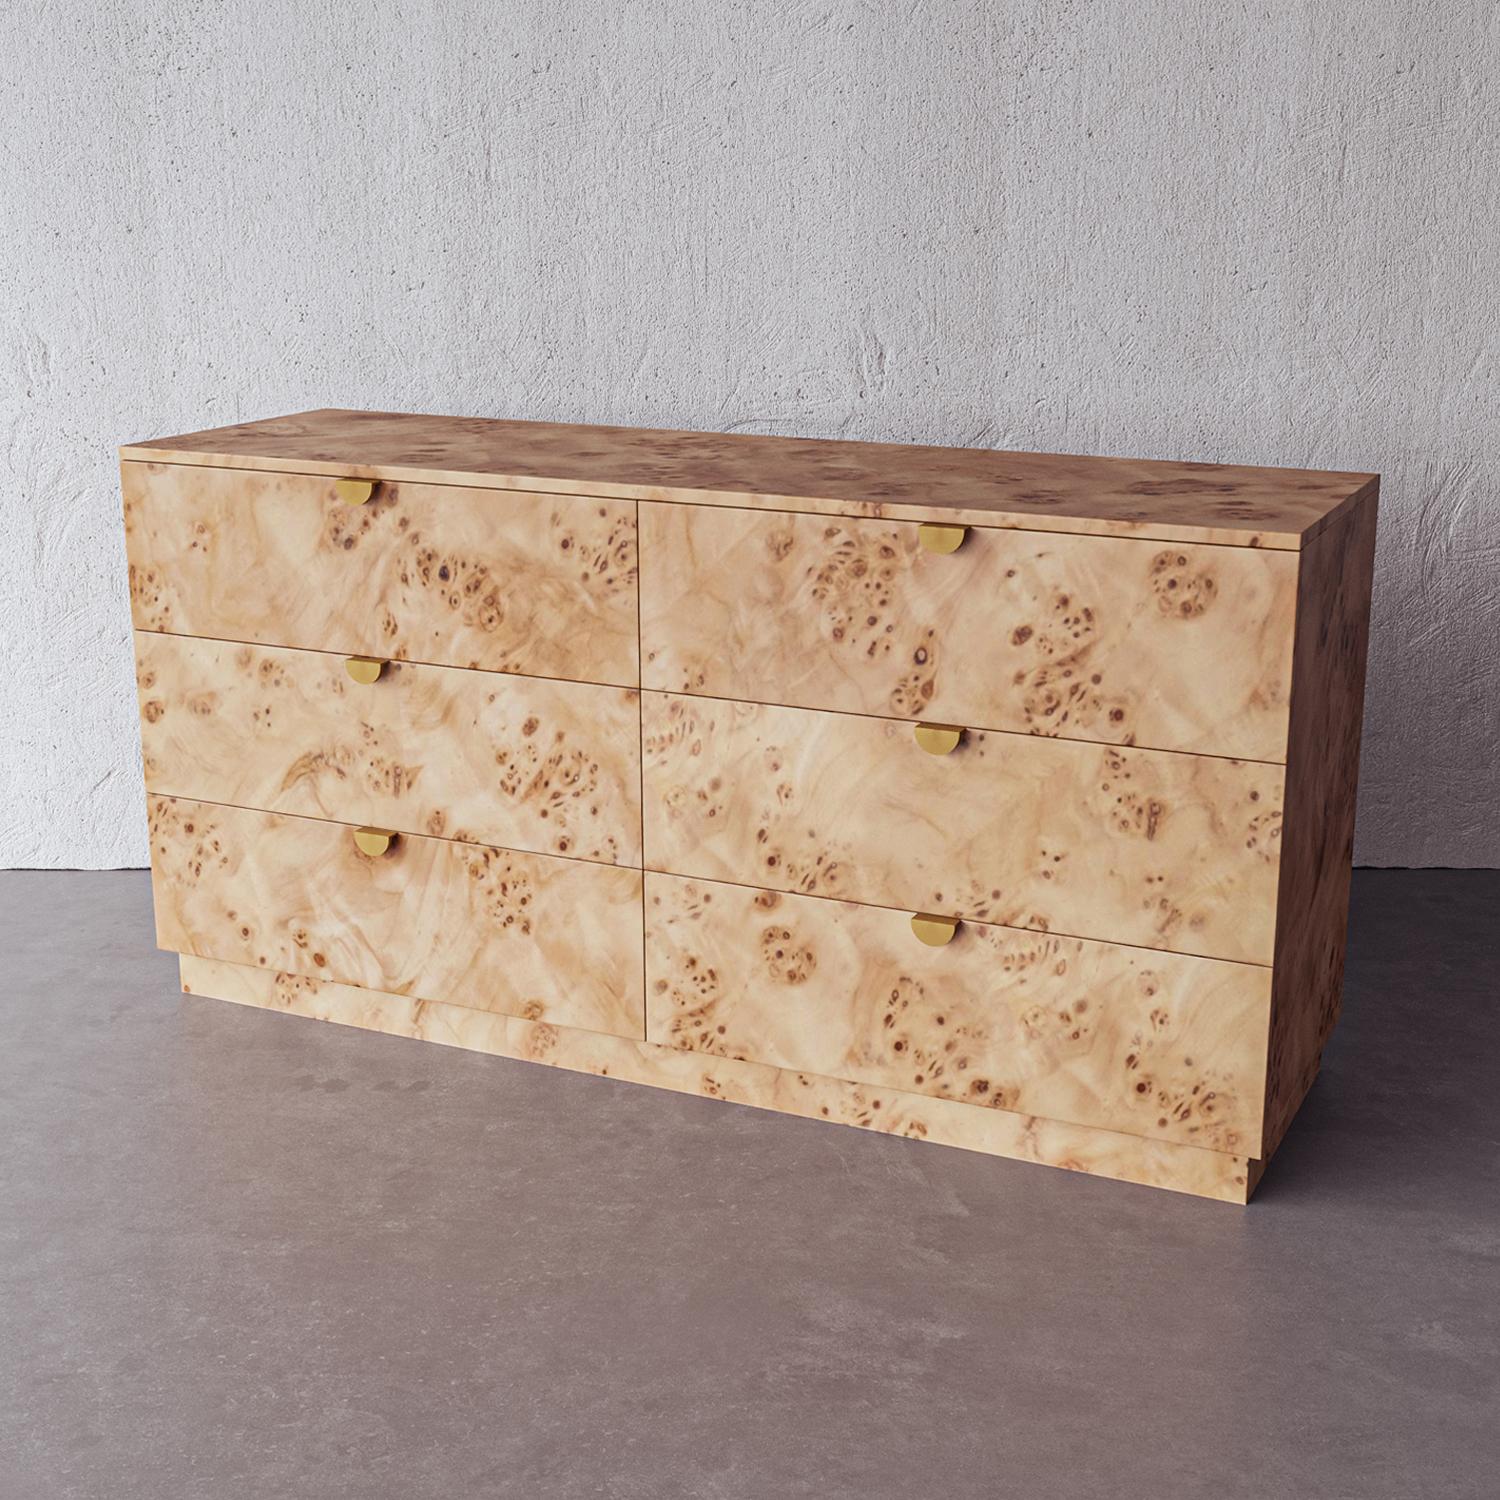 Simple, perfectly proportioned dresser in natural Mappa burl wood features artisanal hand-cast brass hardware and 6 drawers of storage for clothing and other household items. Handmade by artisans in Vietnam, this piece is a gorgeous addition to a